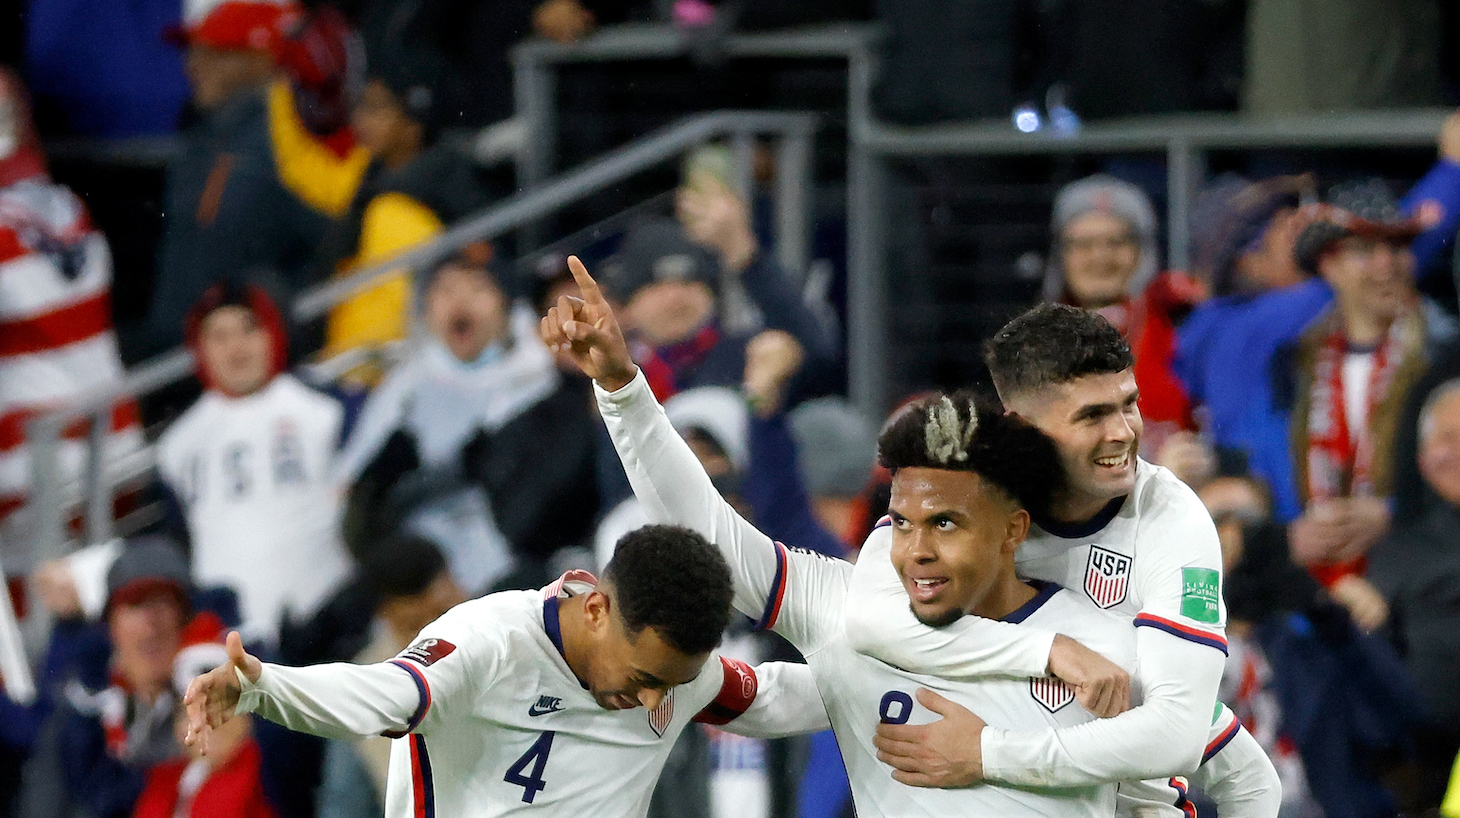 Weston McKennie #8 of the United States is congratulated by Christian Pulisic #10 and Tyler Adams #4 after scoring a goal during the second half of the FIFA World Cup 2022 Qualifier match against Mexico at TQL Stadium on November 12, 2021 in Cincinnati, Ohio. The United States defeated Mexico 2-0.